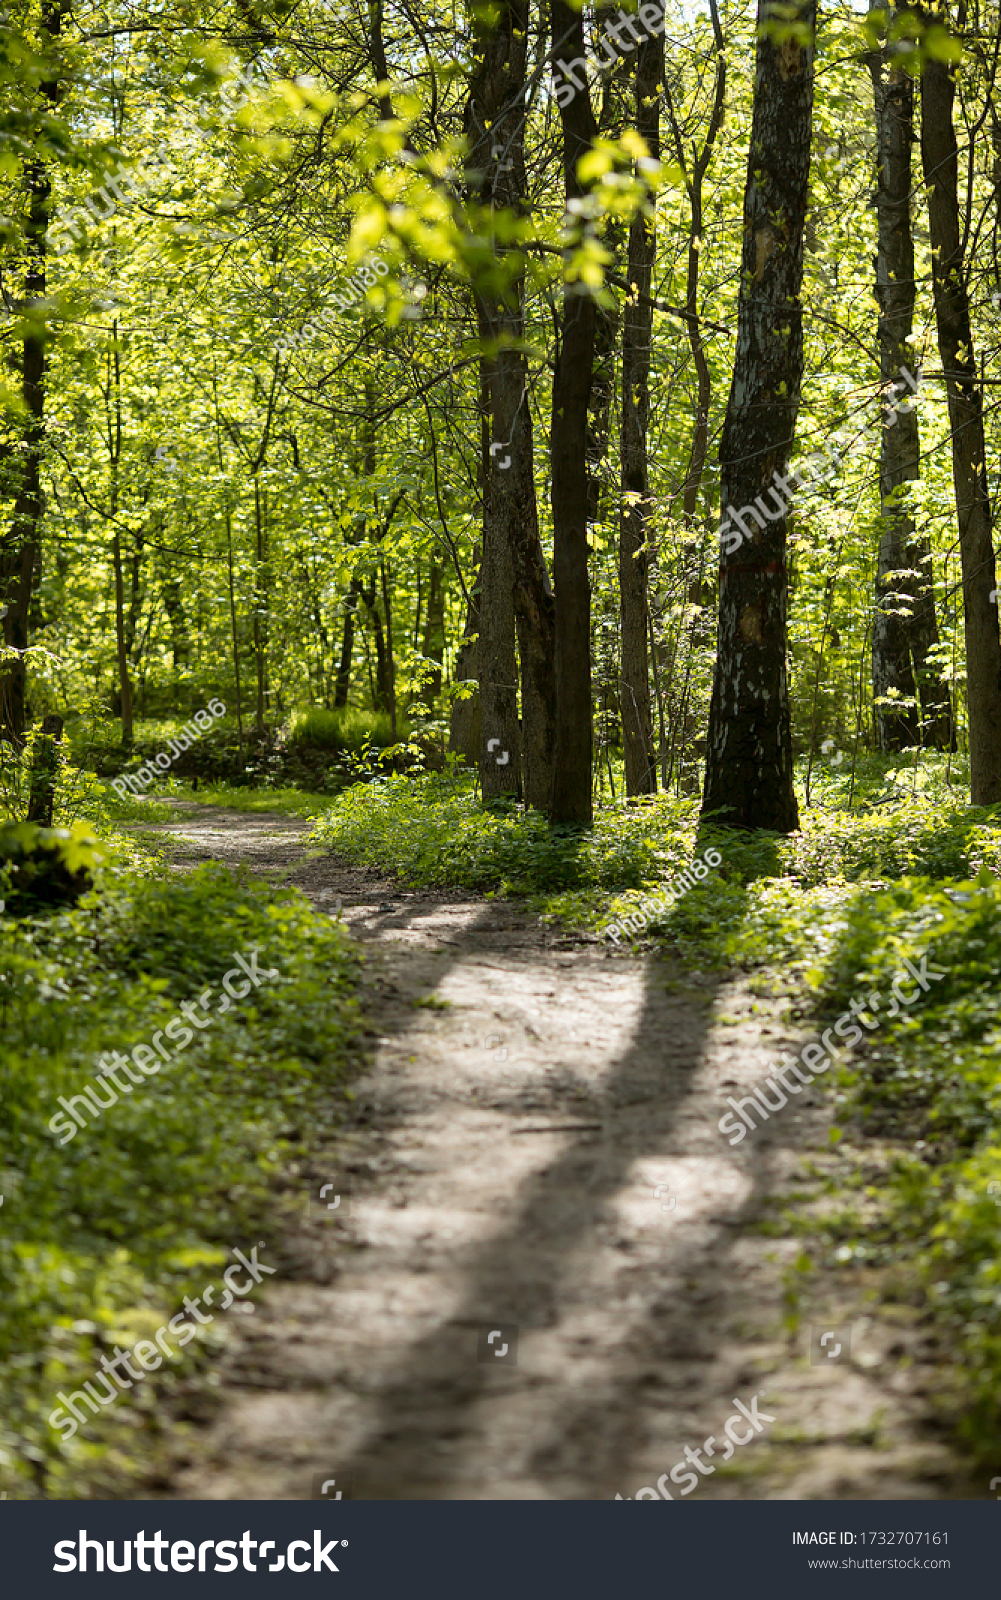 Spring forest. Fresh greenery, path and bright sun shining through the trees. #1732707161